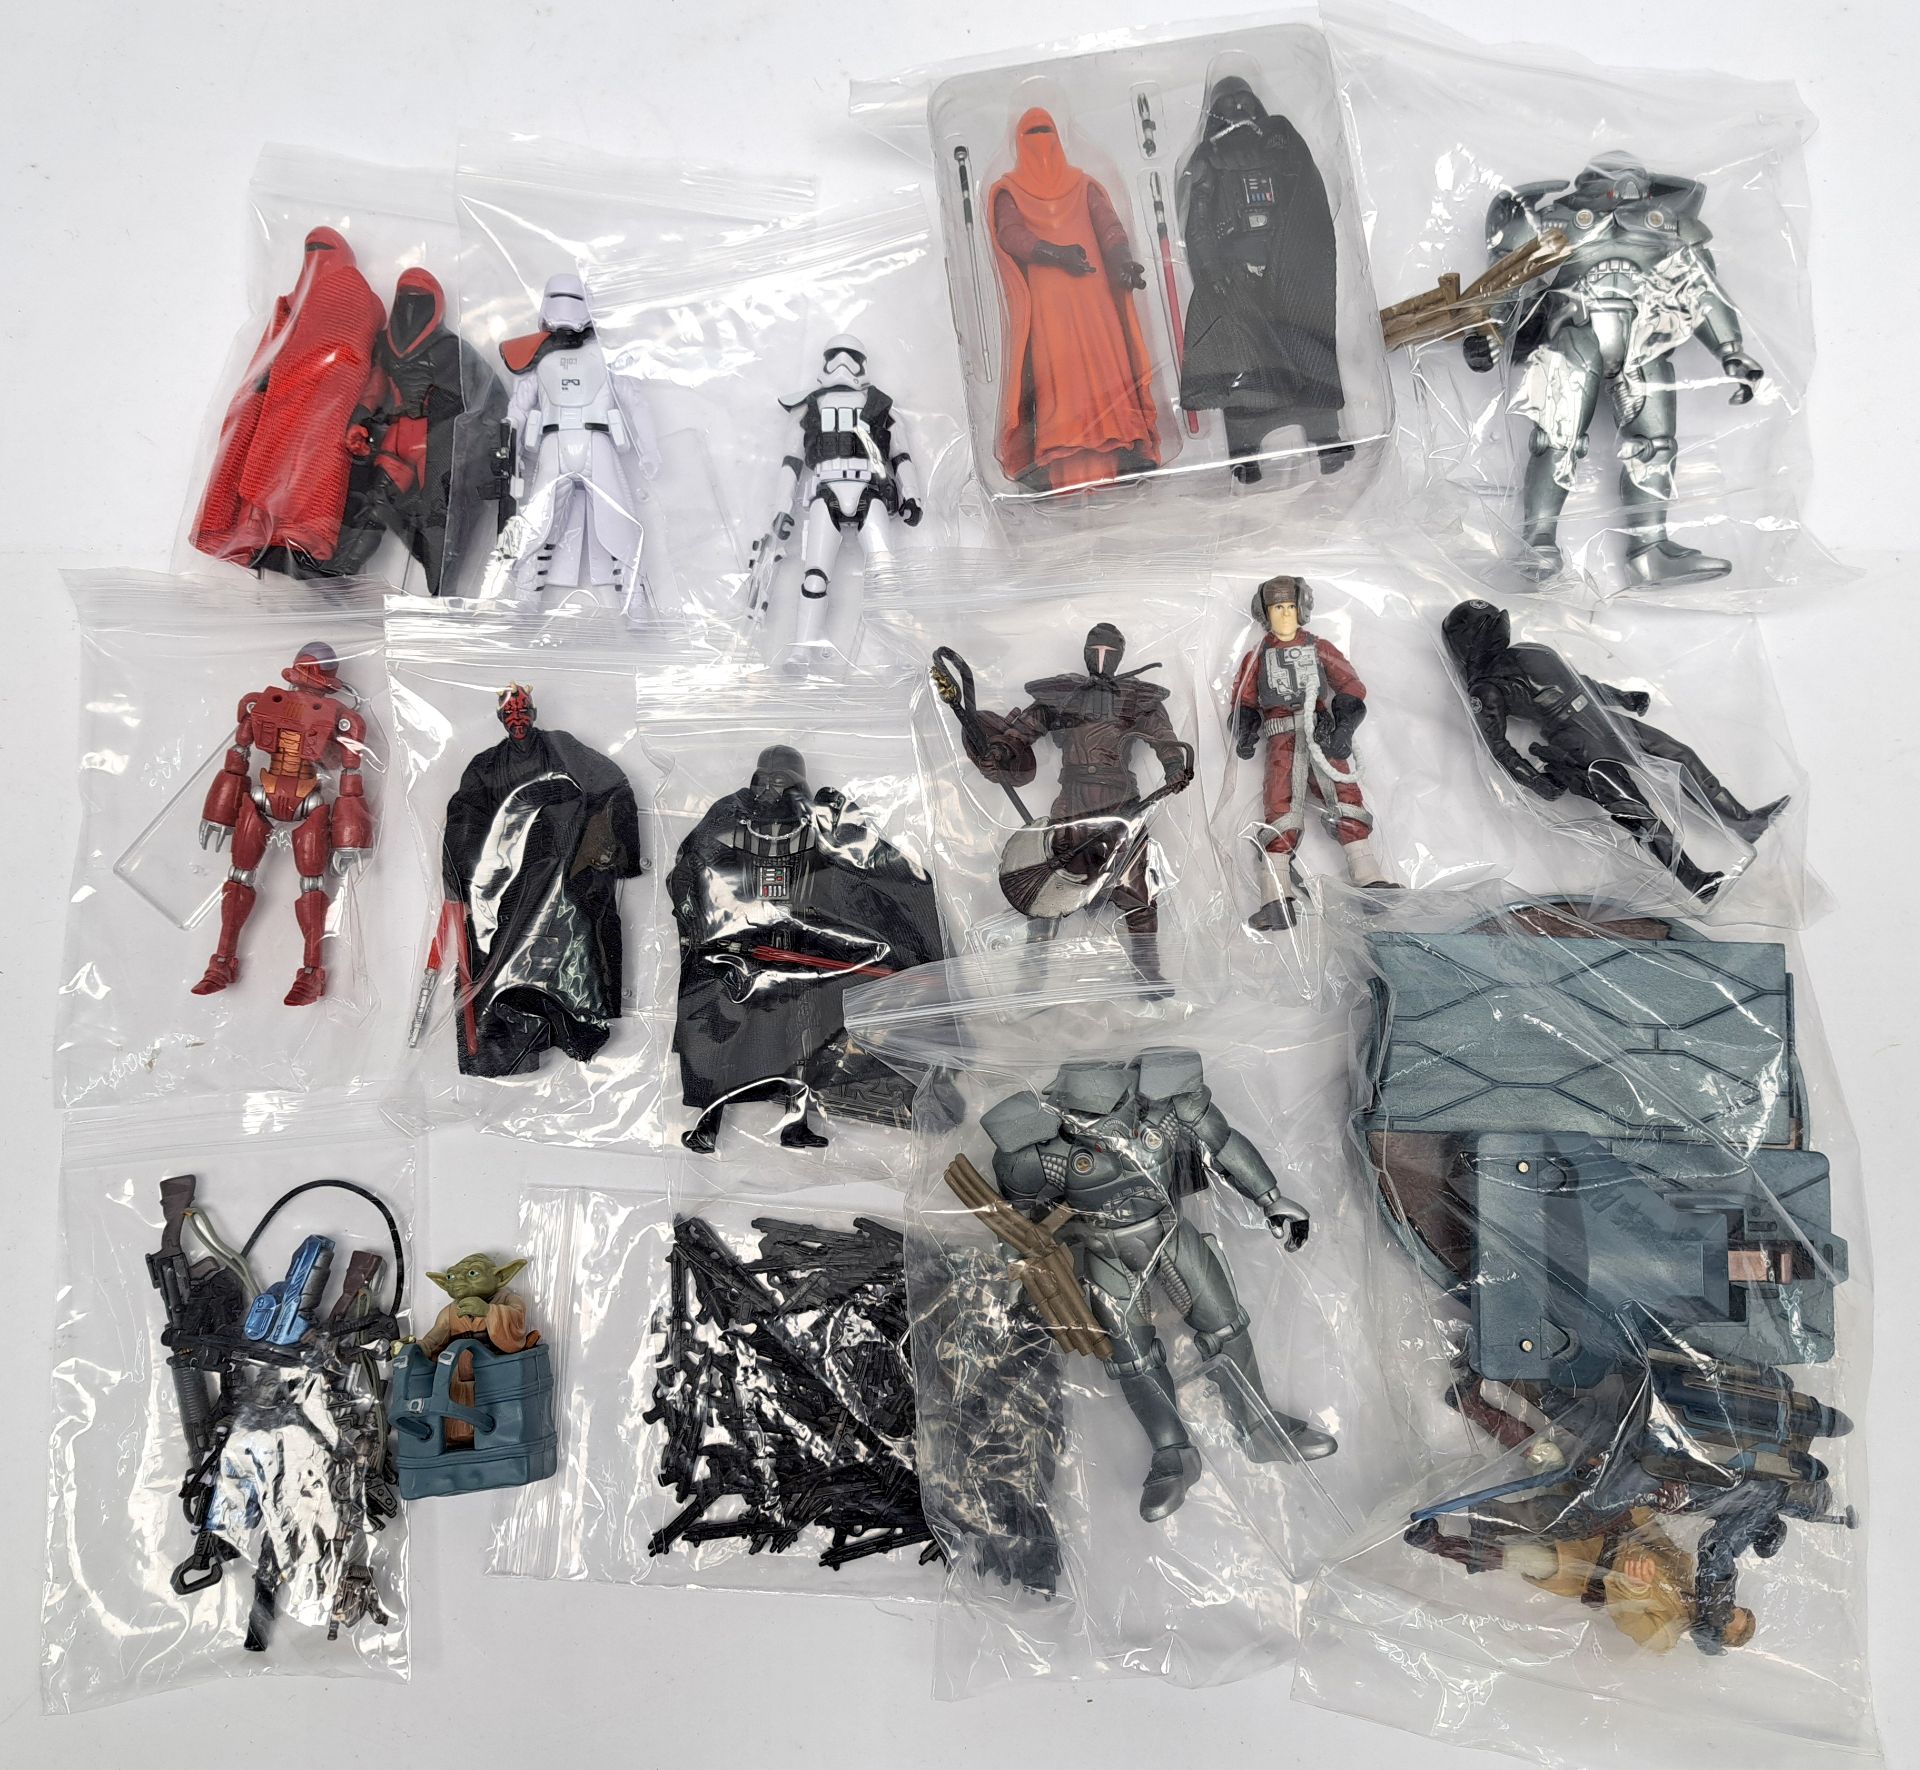 Hasbro Star Wars loose figures mixed lot including Dark Troopers, Darth Vader, Maul. Excellent to...